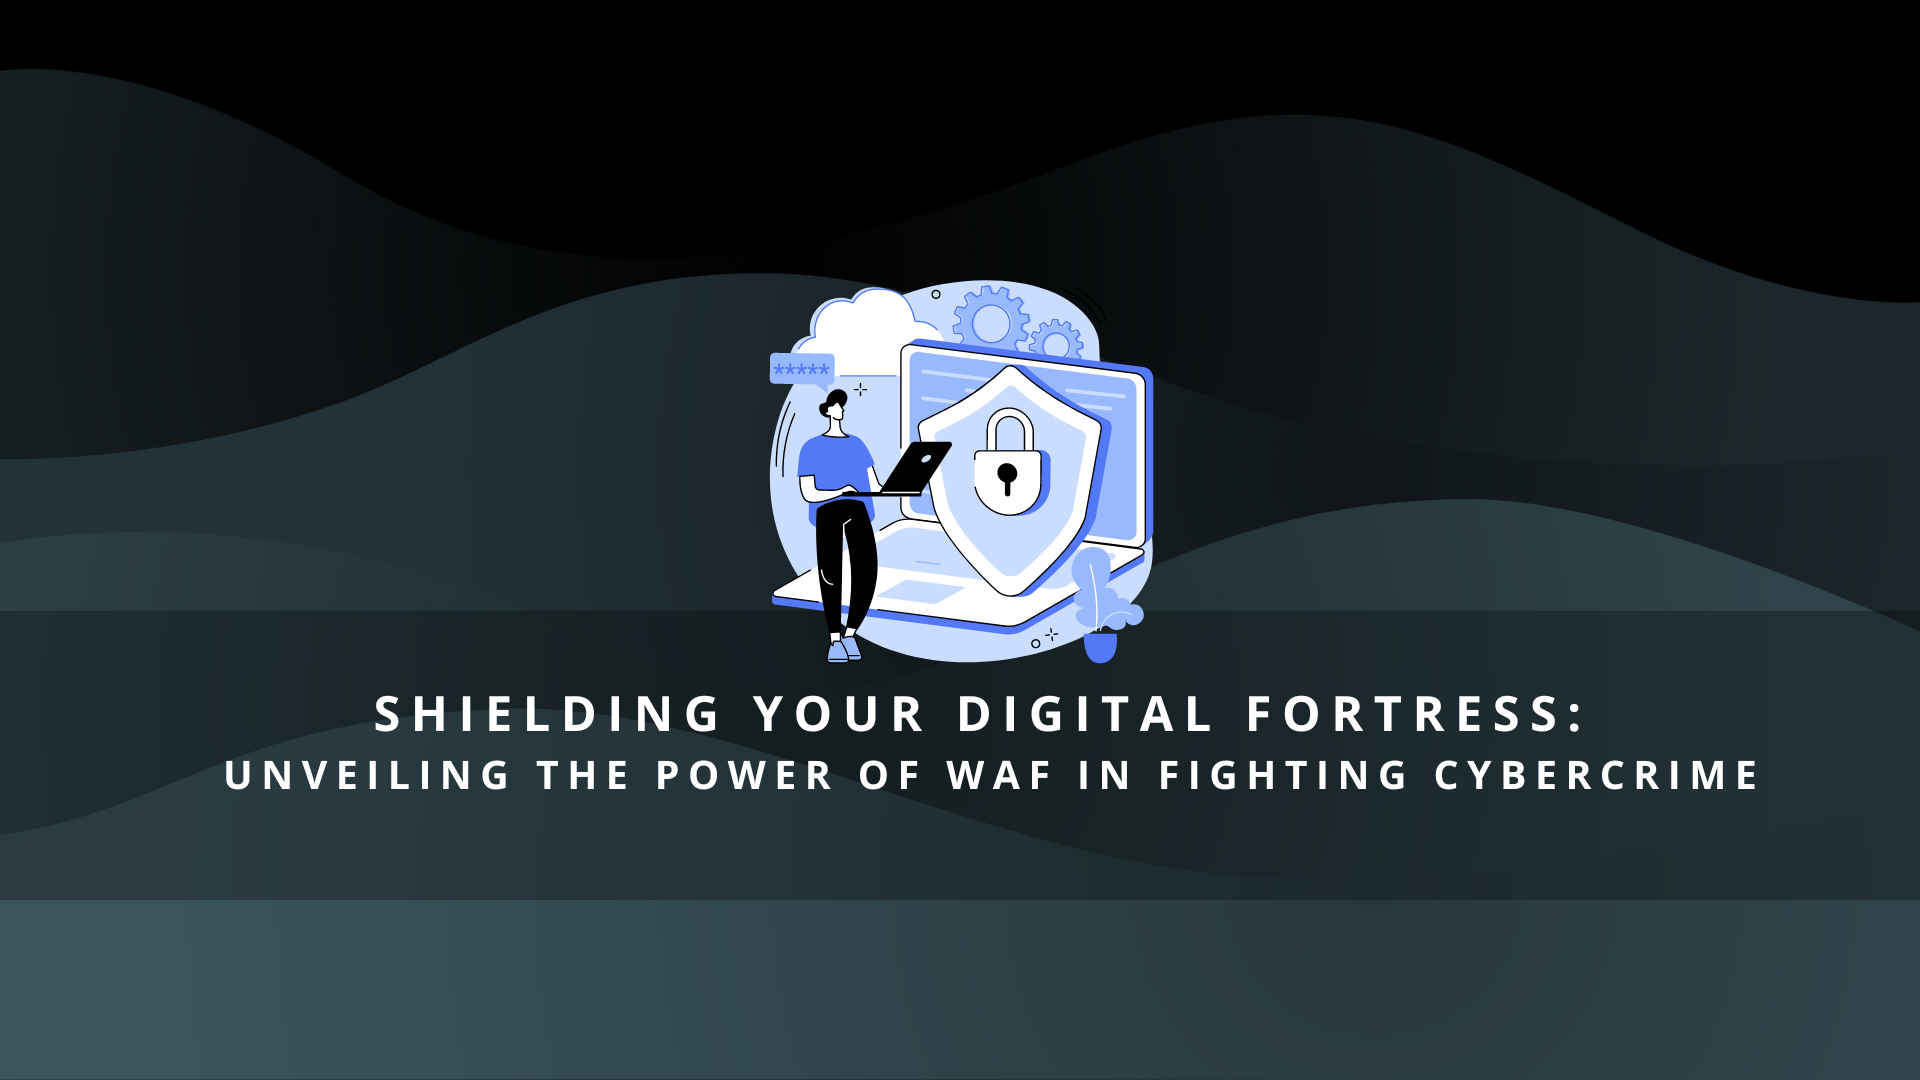 Shielding Your Digital Fortress Unveiling the Power of WAF in Fighting Cybercrime